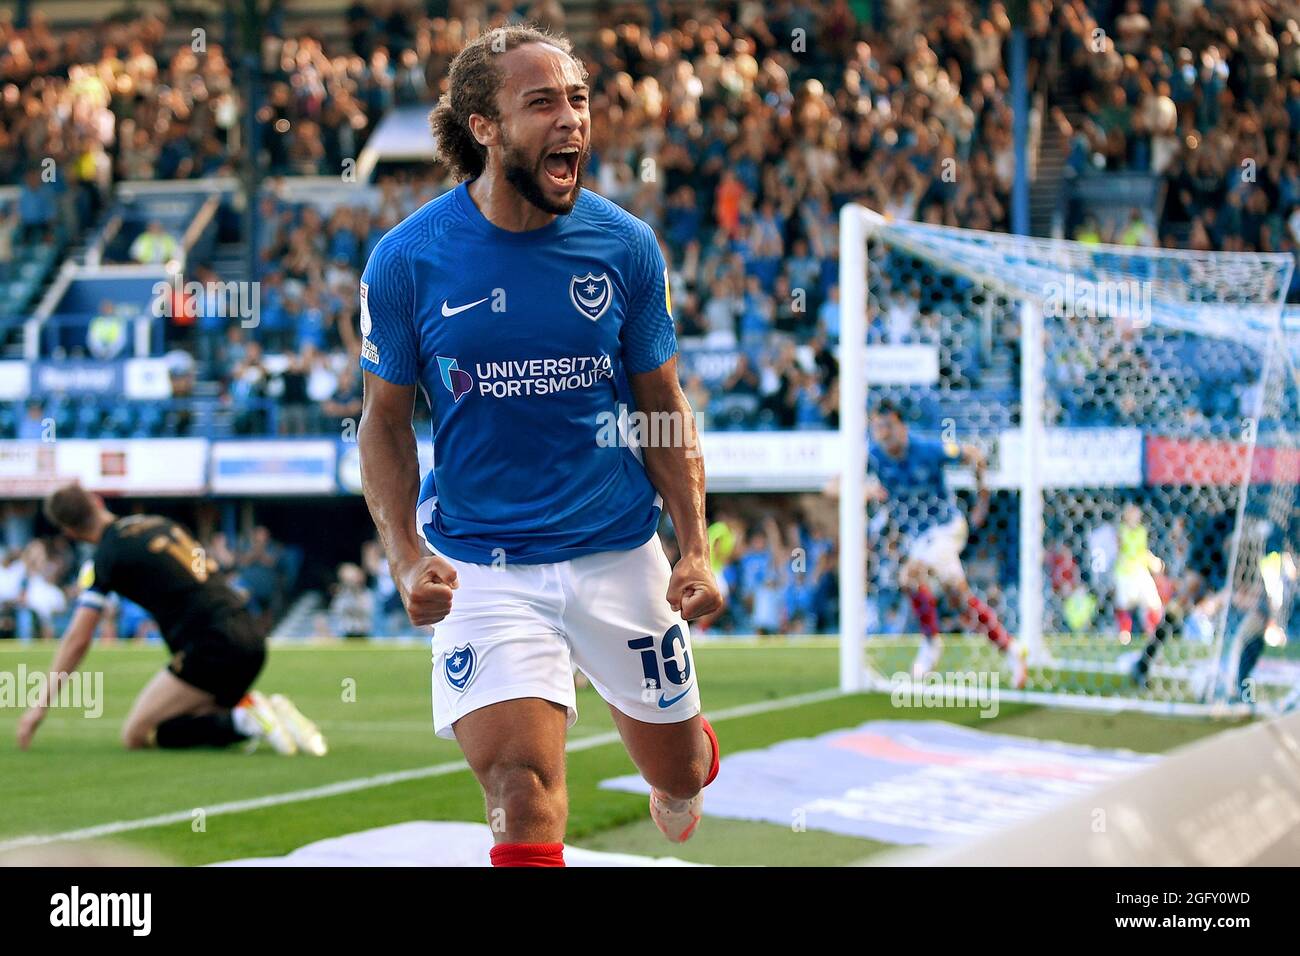 Marcus Harness of Portsmouth celebrates after scoring a goal to make the  score 2-0 - Portsmouth v Crewe Alexandra, Sky Bet League One, Fratton Park,  Portsmouth, UK - 14th August 2021 Editorial